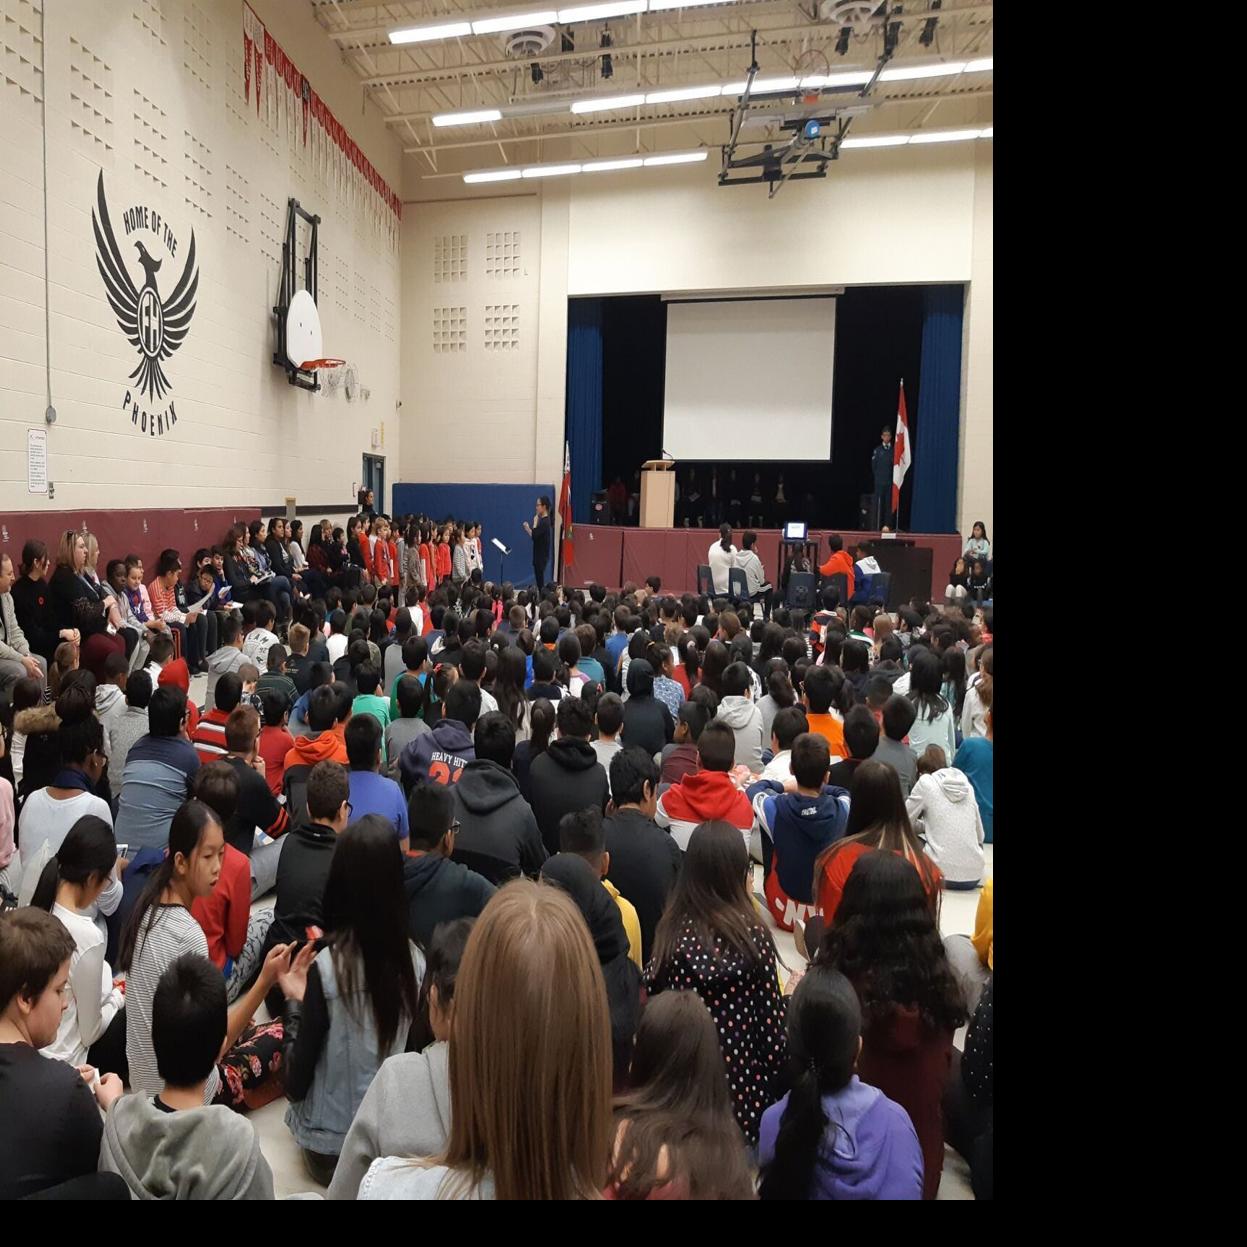 Vaughan's Fossil Hill Public School solemnly observes Remembrance Day